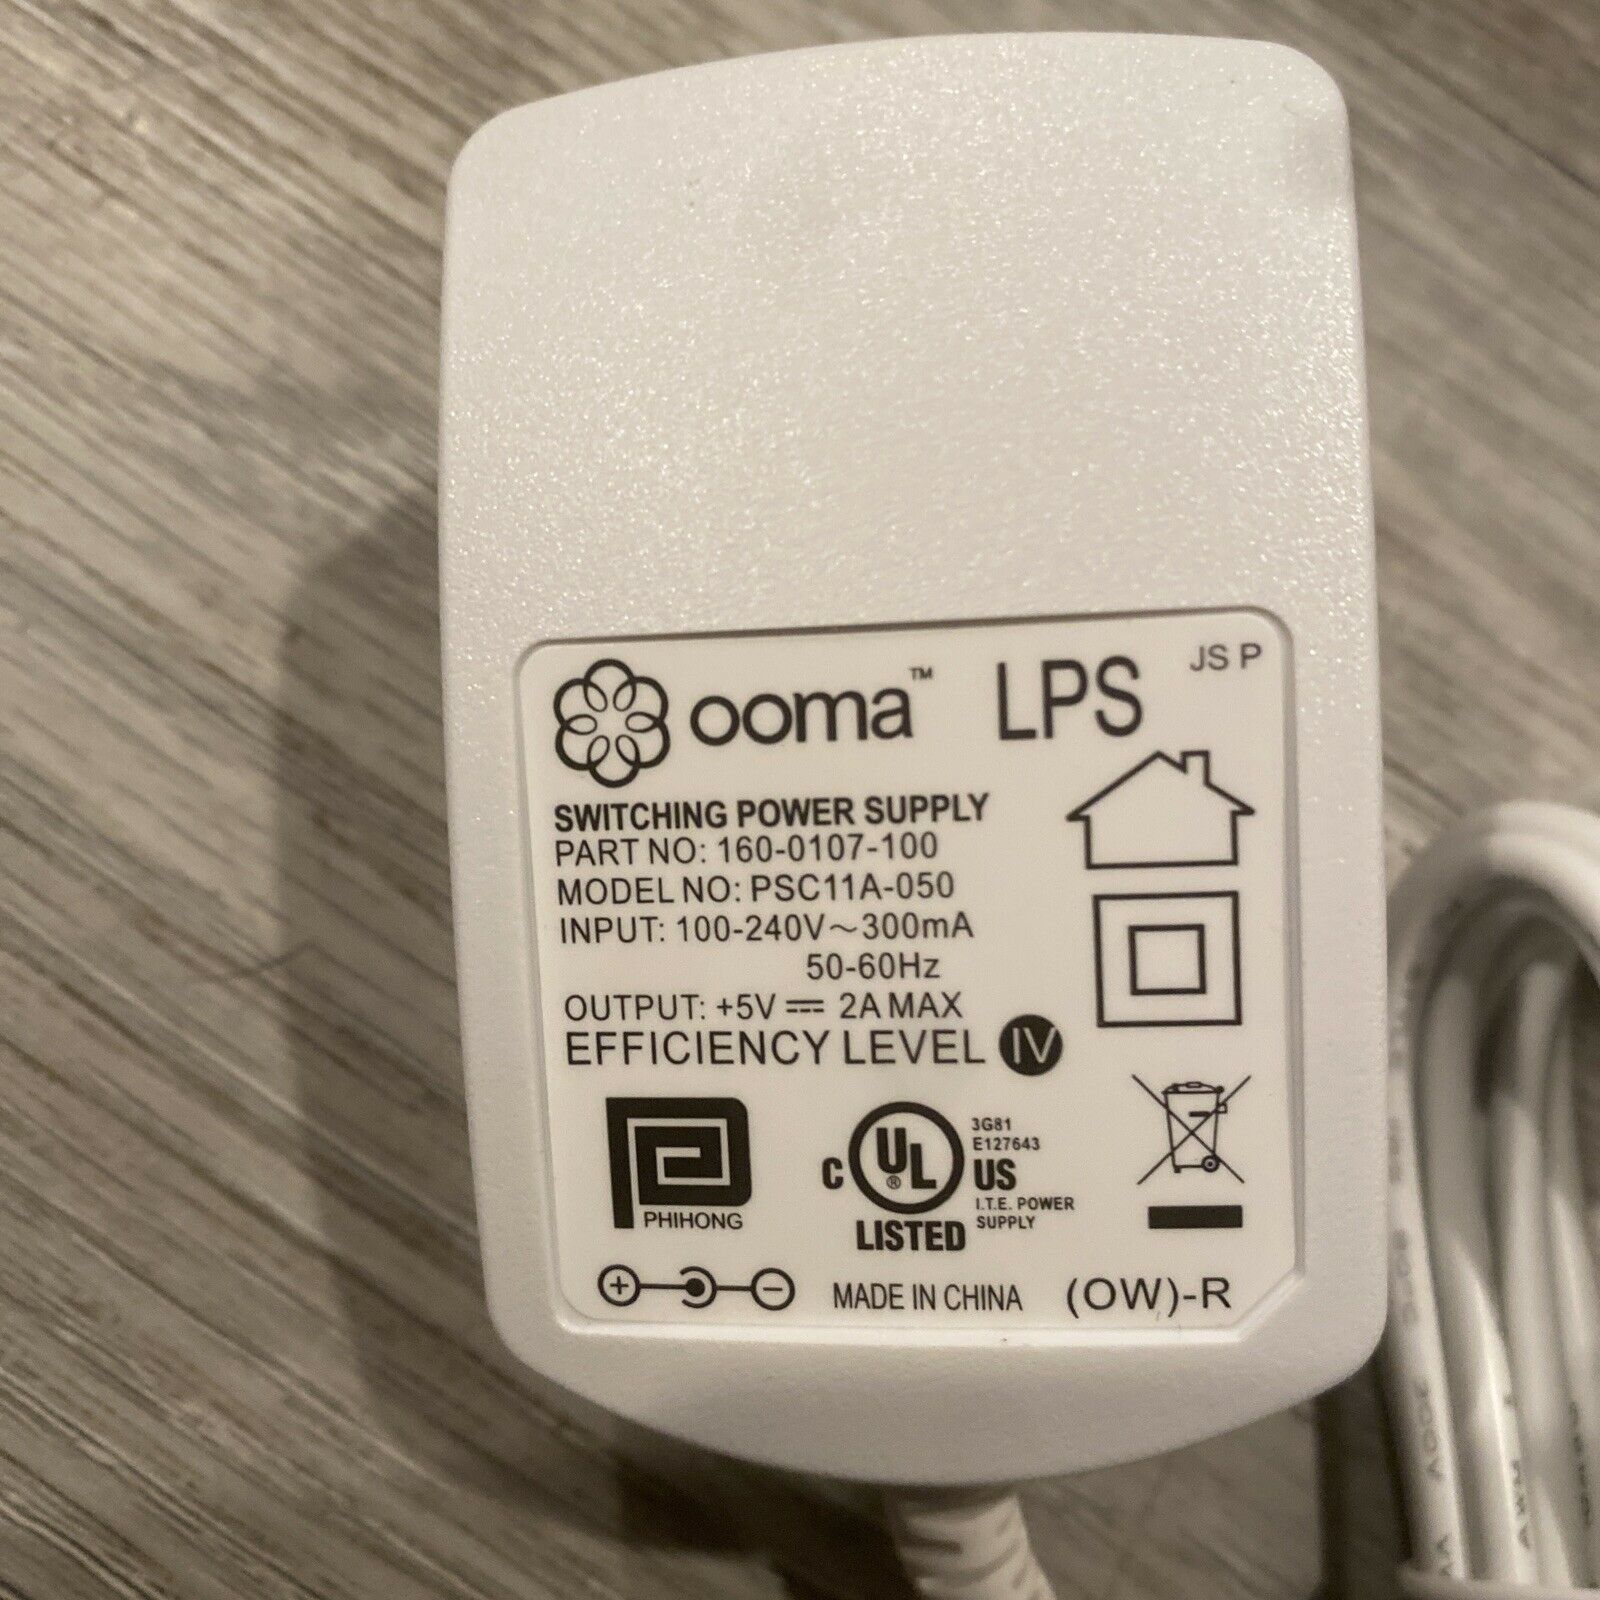 Genuine Original OEM ooma 160-0107-100 PSC11A-050 Power Supply AC Adapter 5V 2A Brand: ooma Type: Adapter Connection - Click Image to Close